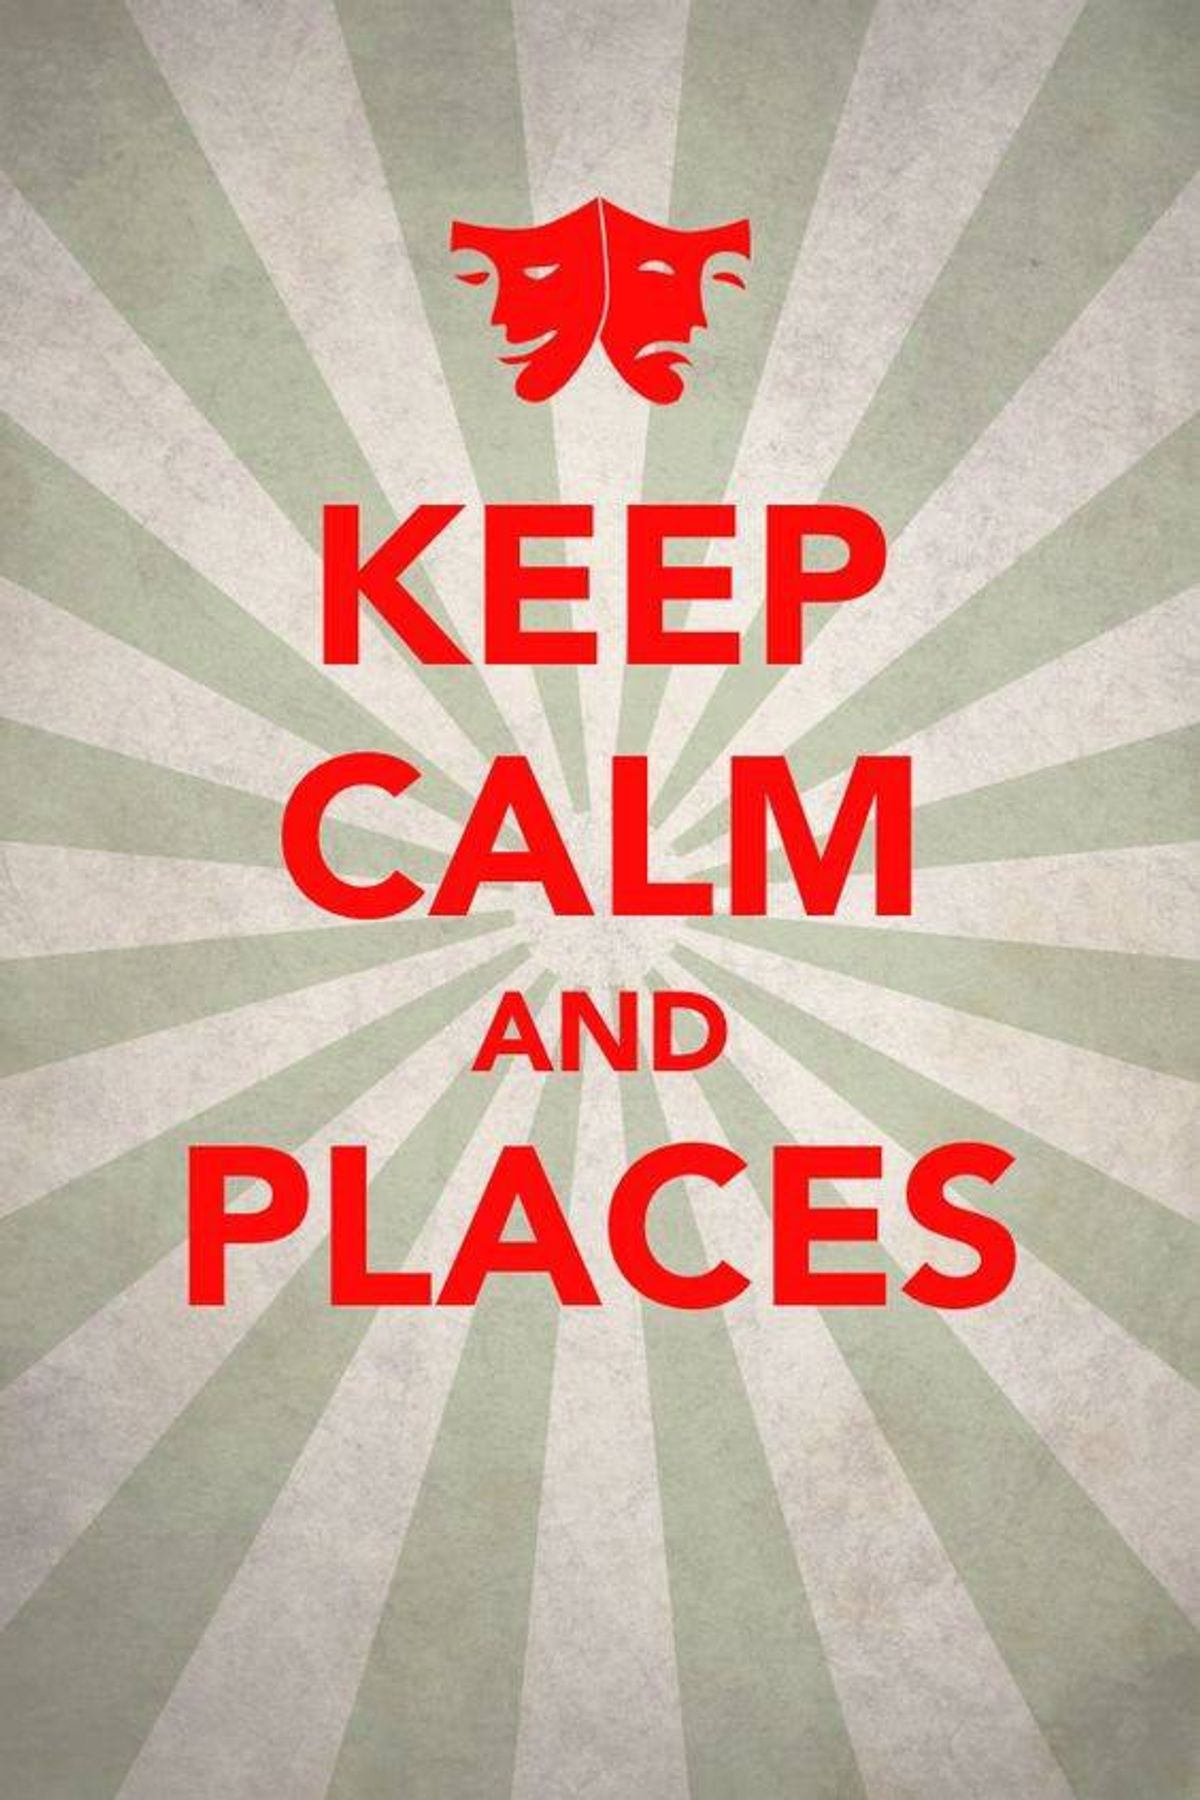 Places!: It's More Than Just A Word